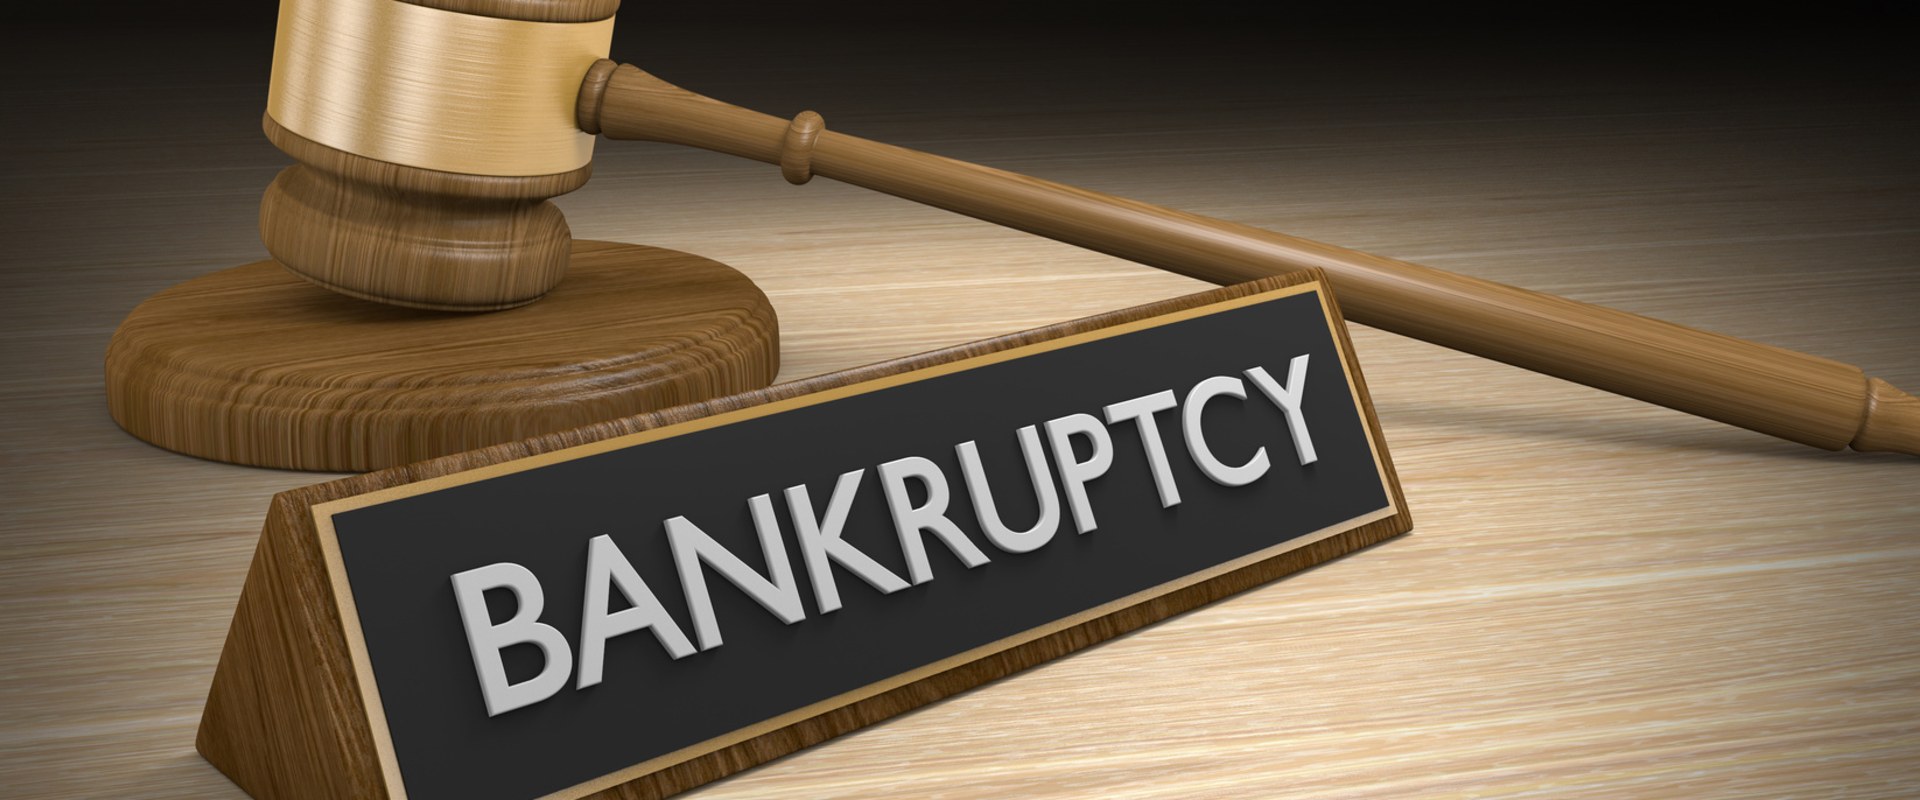 Are bankruptcy laws changing?